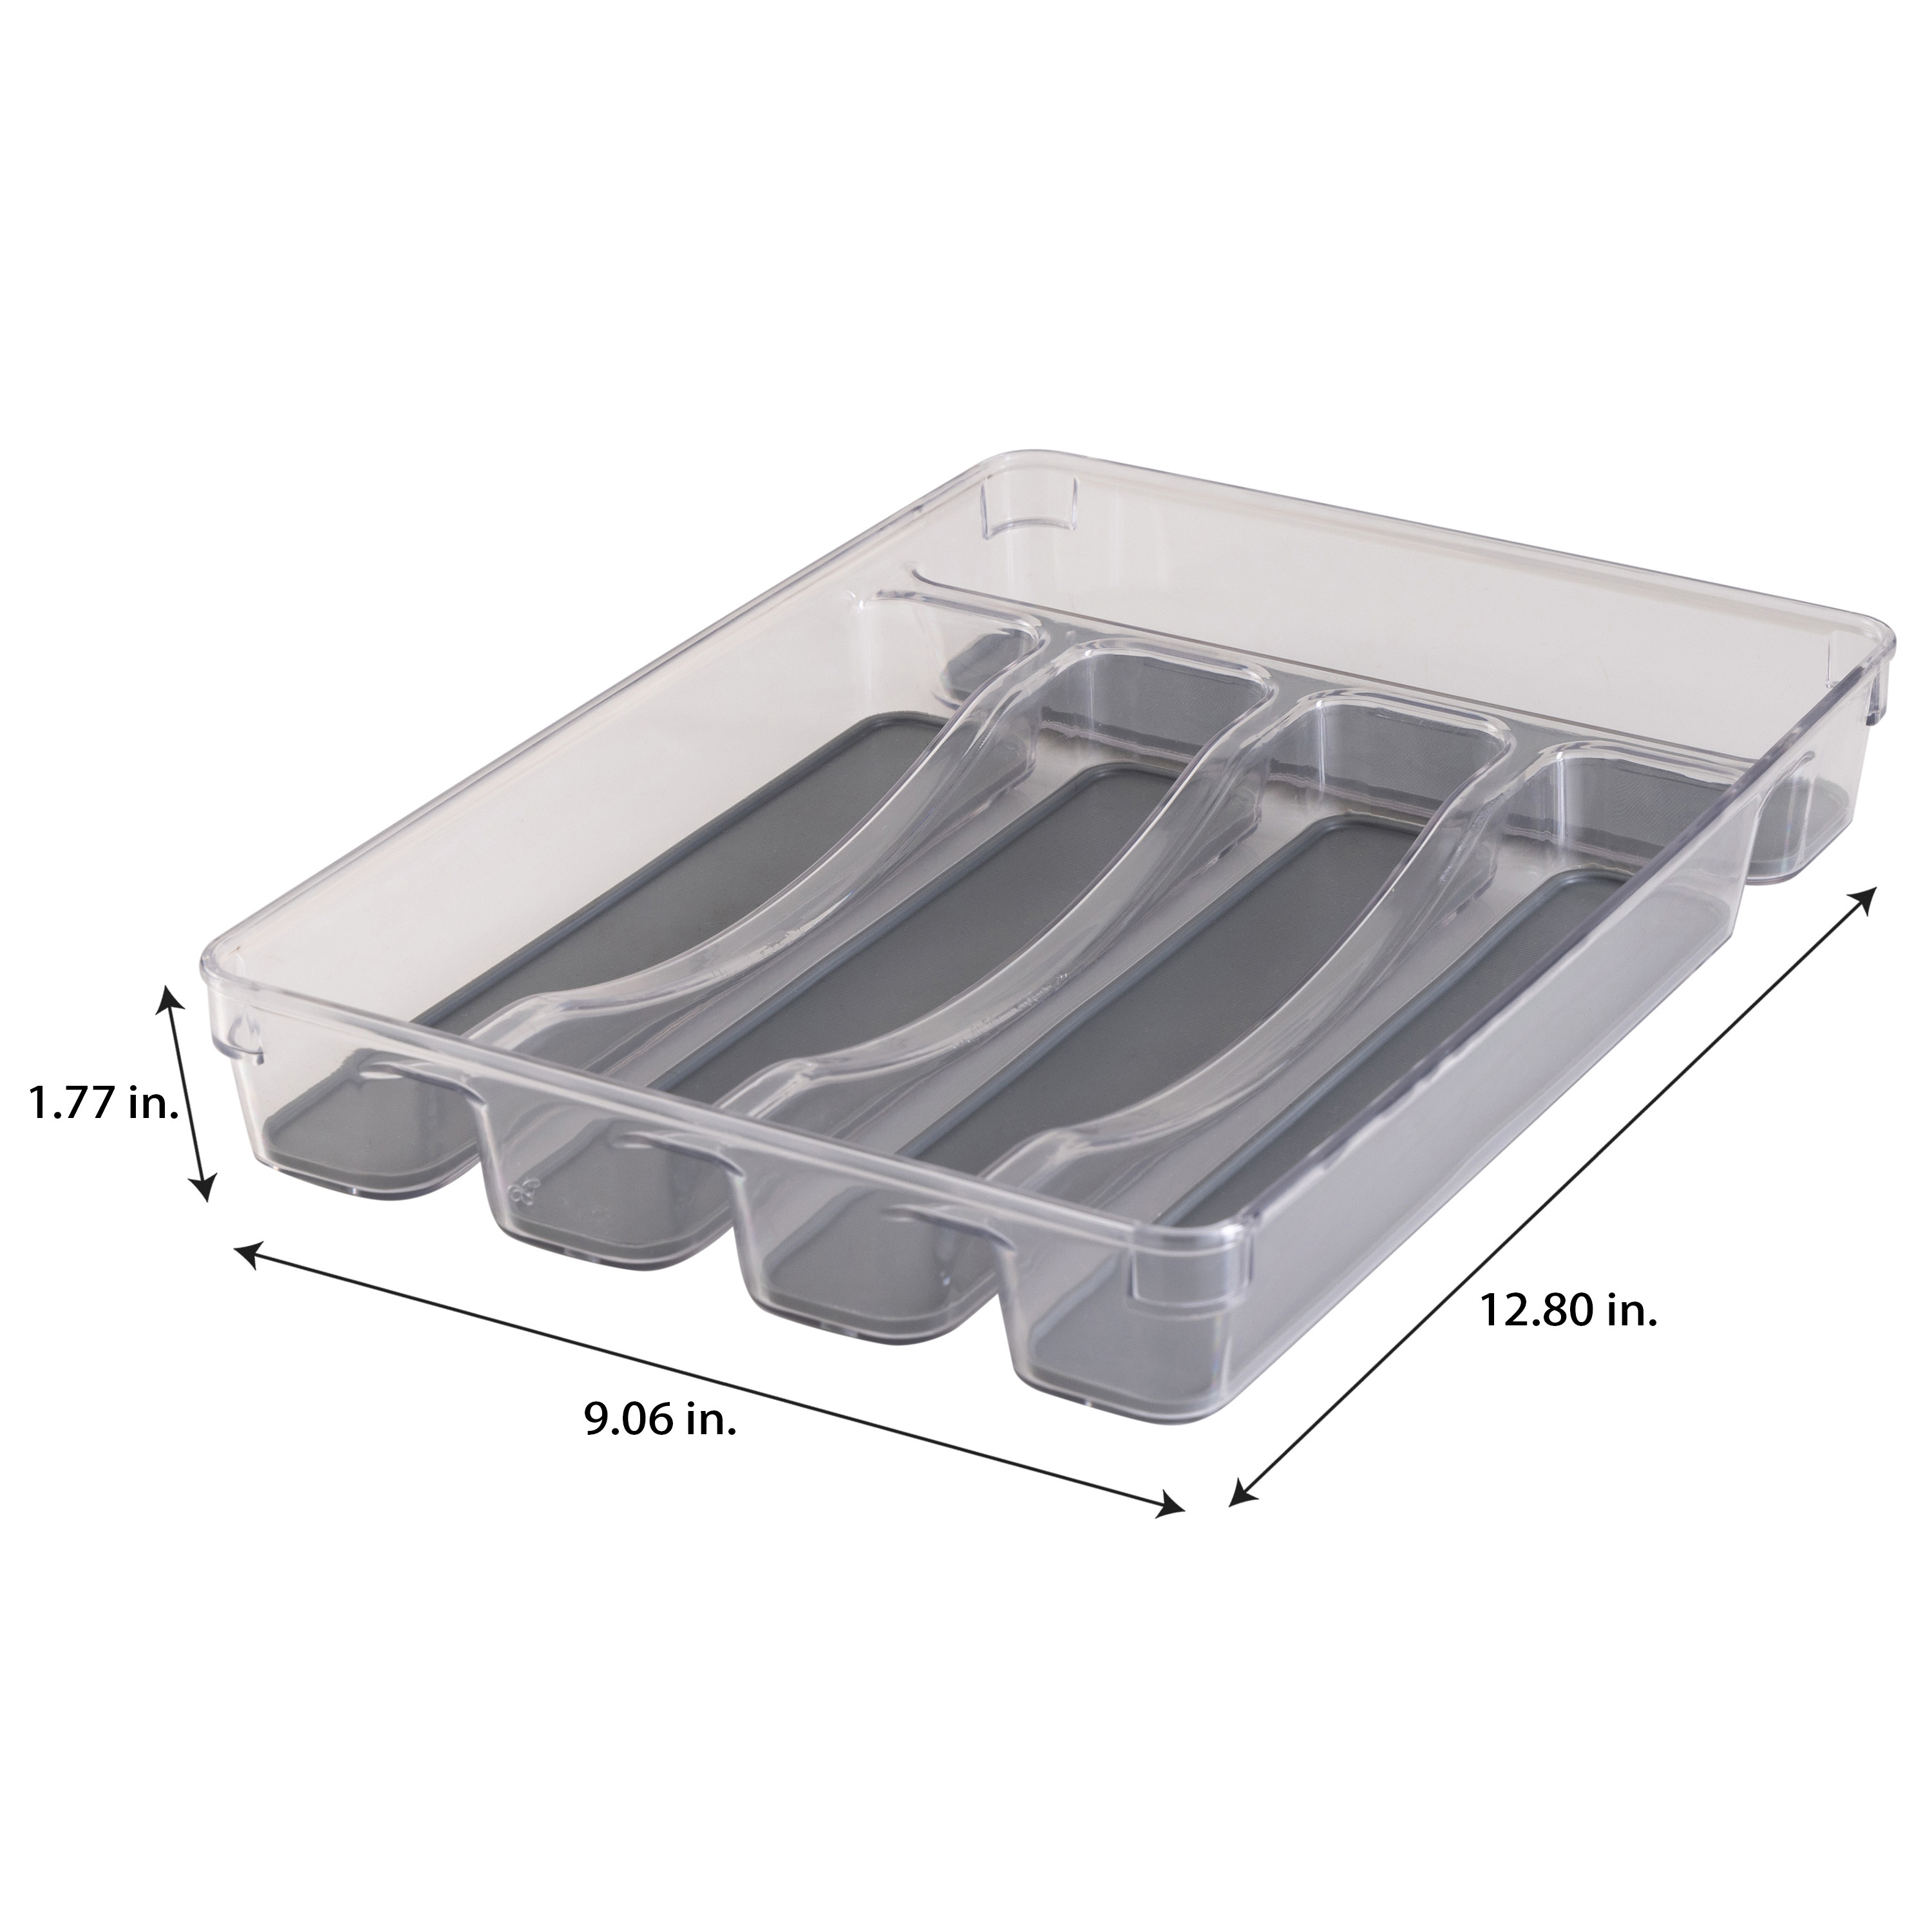 Kitchen Details 5 Compartment Plastic Cutlery Tray, Clear - image 5 of 8